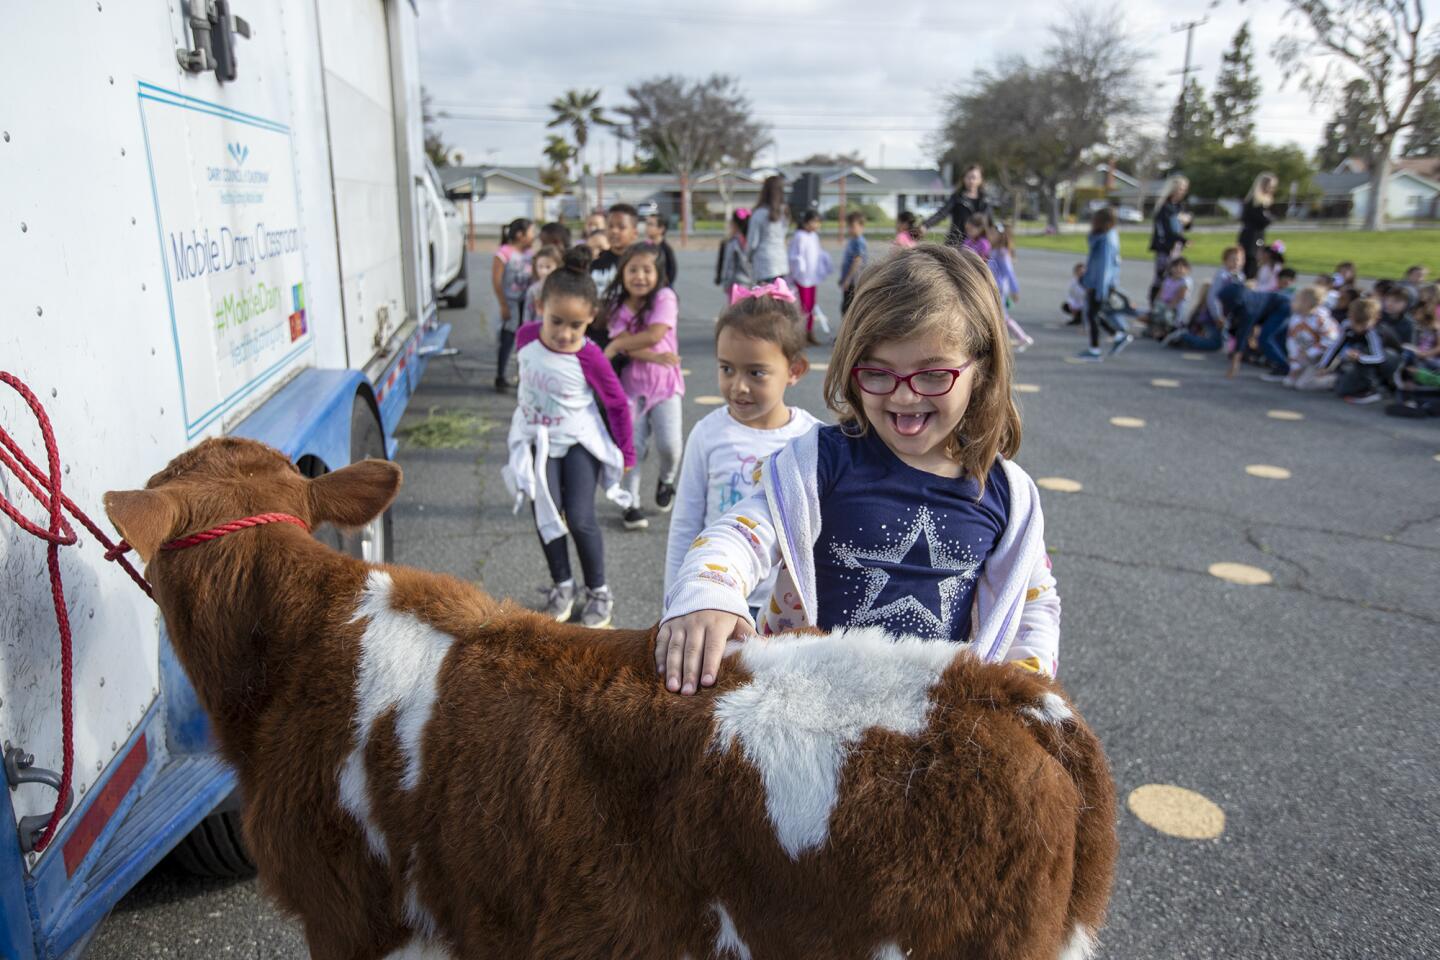 Charlotte Thomas, 6, a student at College View Elementary School in Huntington Beach, pets a 2-month-old calf named Big Red during the Mobile Dairy Classroom presented by the Dairy Council of California on Wednesday.